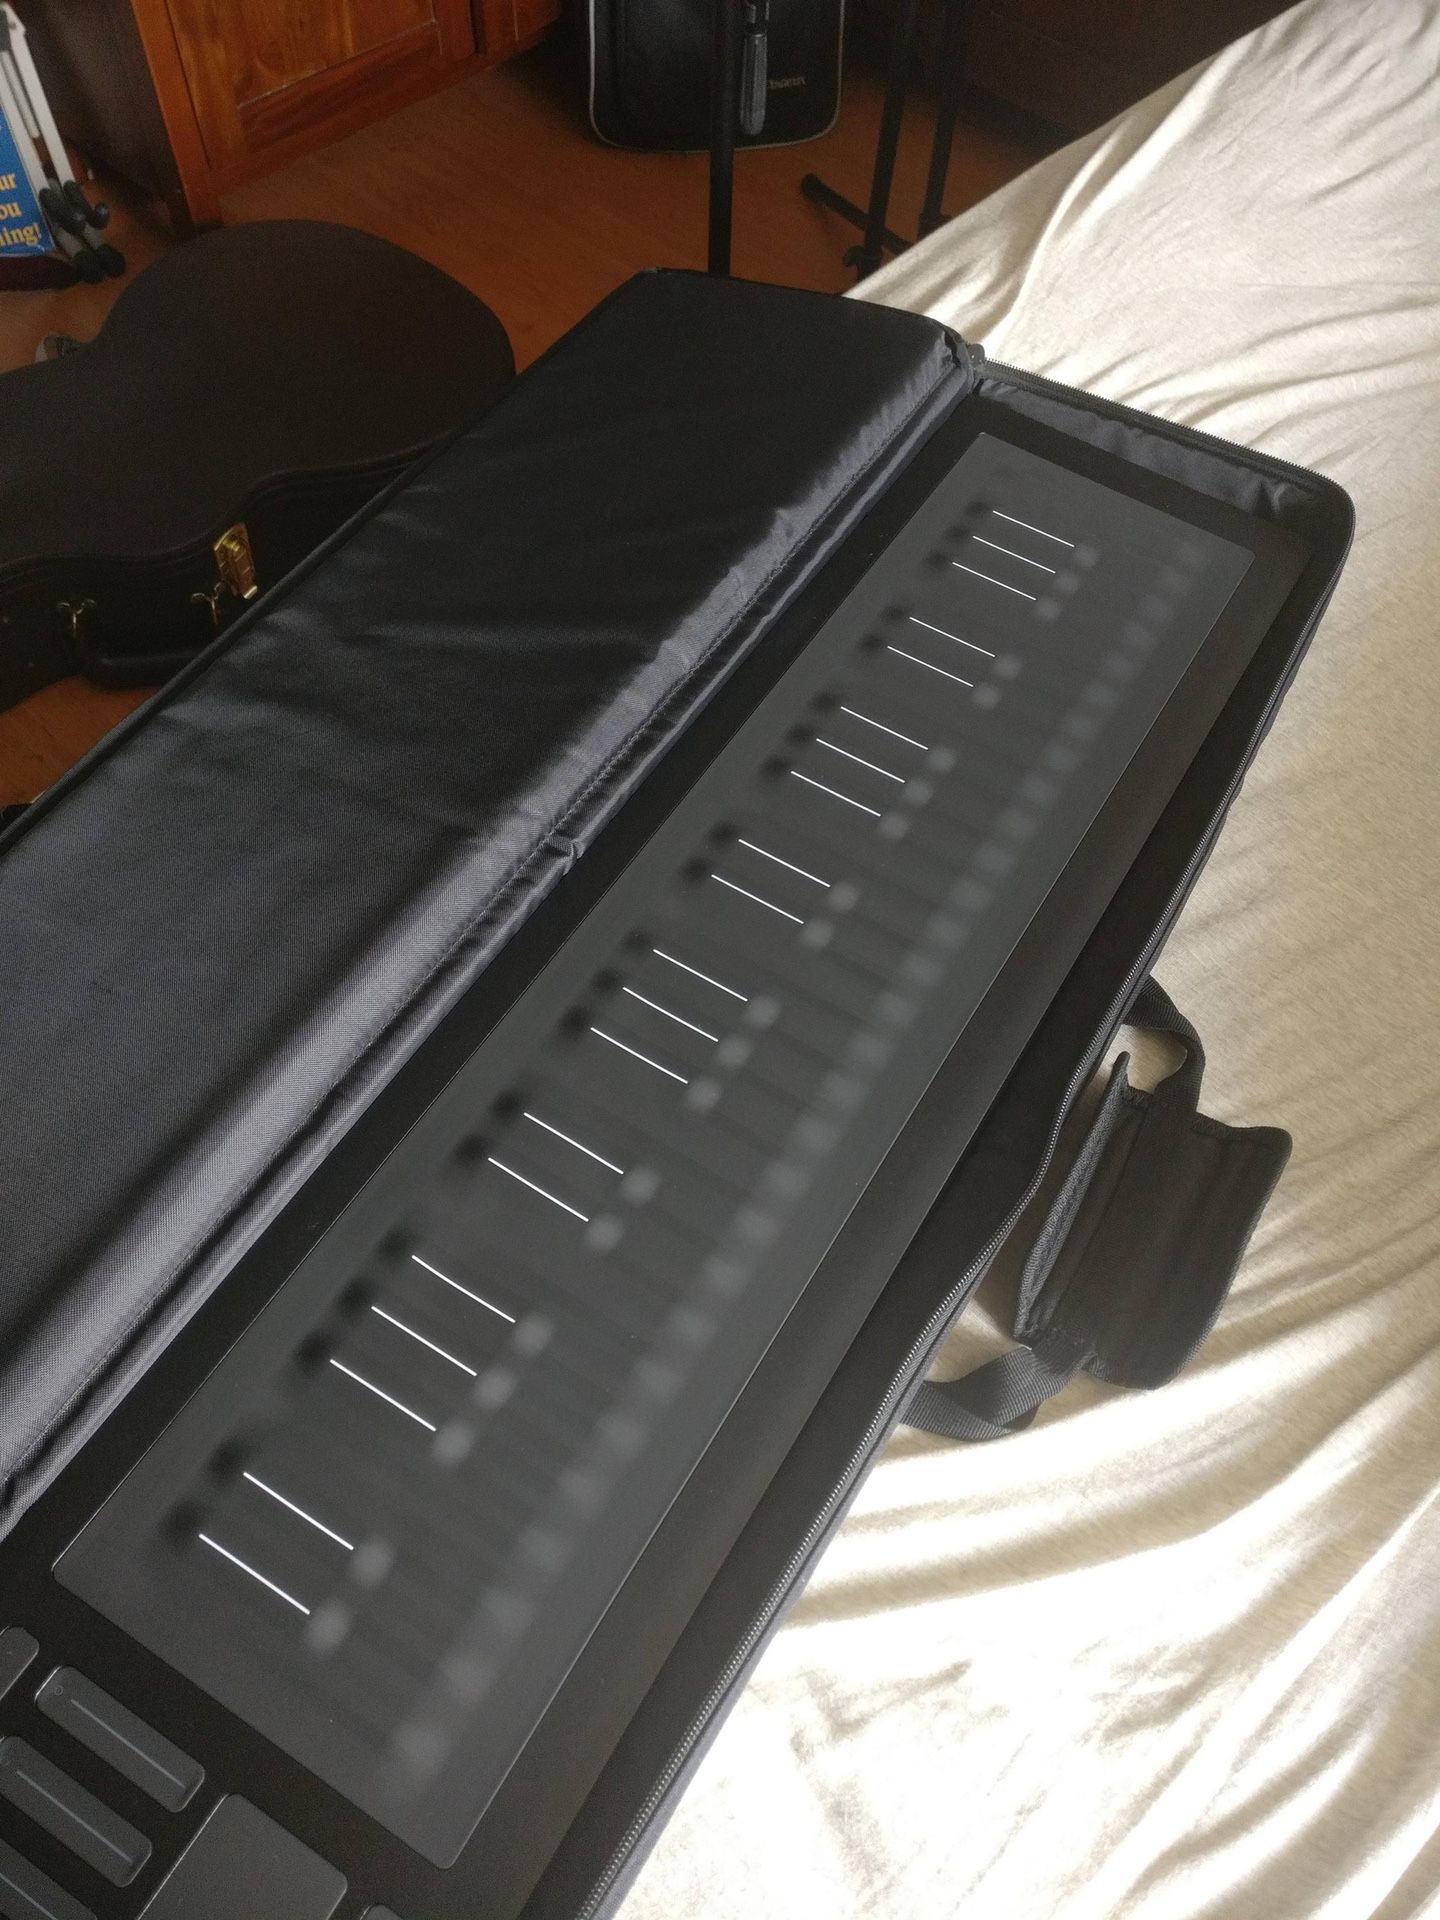 ROLI Seaboard rise 49, like new with case, will consider trades and Best offers. Trying to move fast.